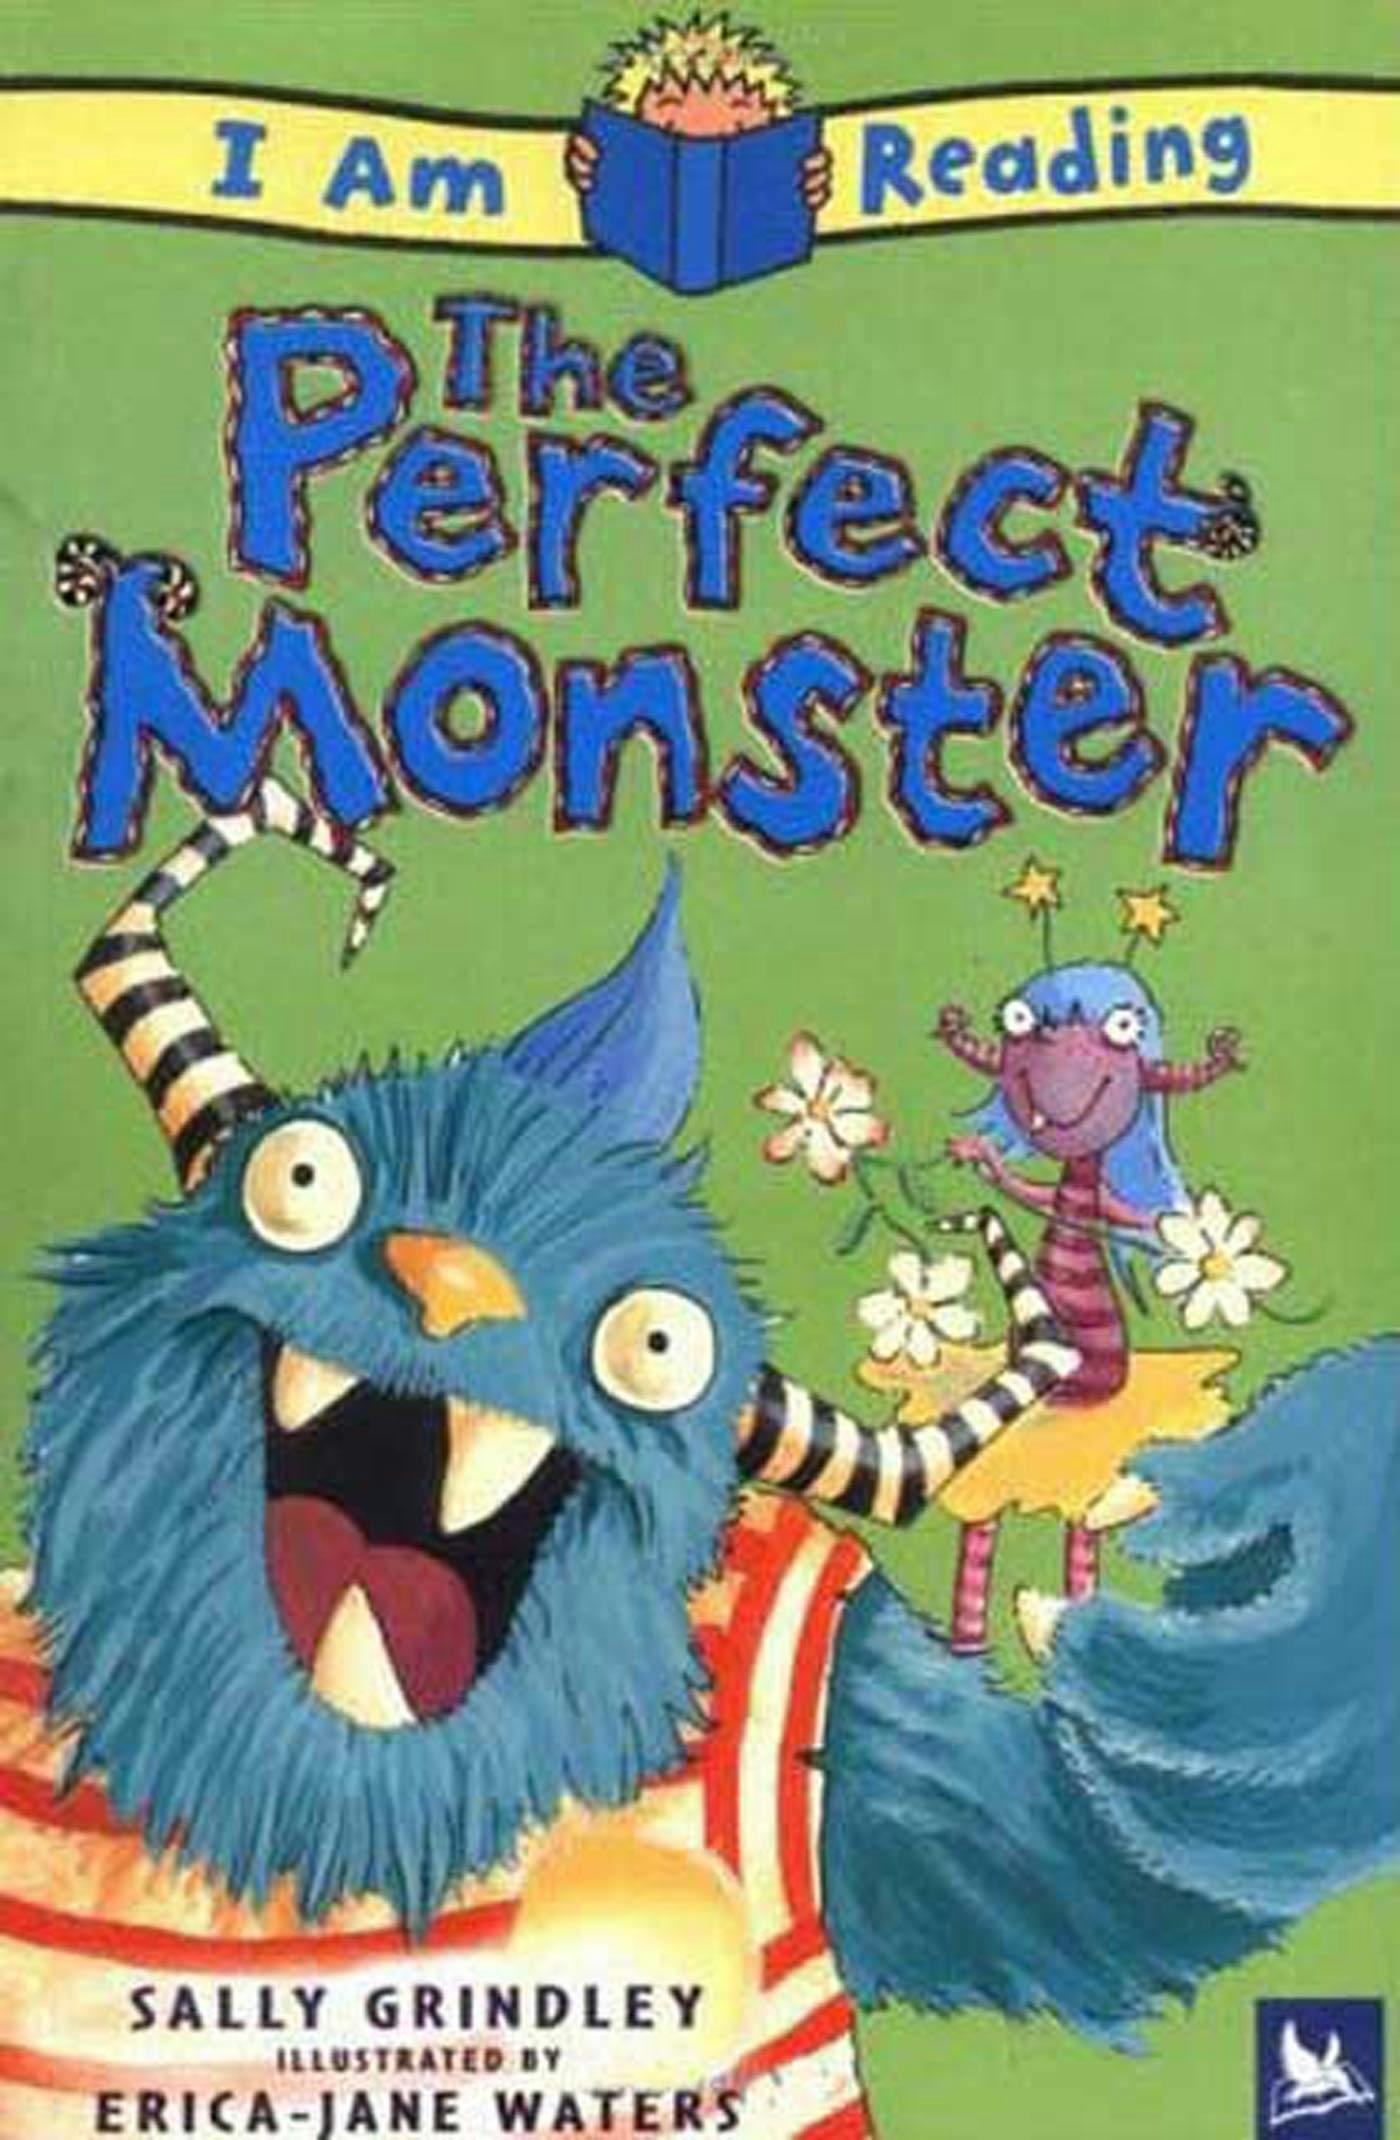 Perfectmonster overview for